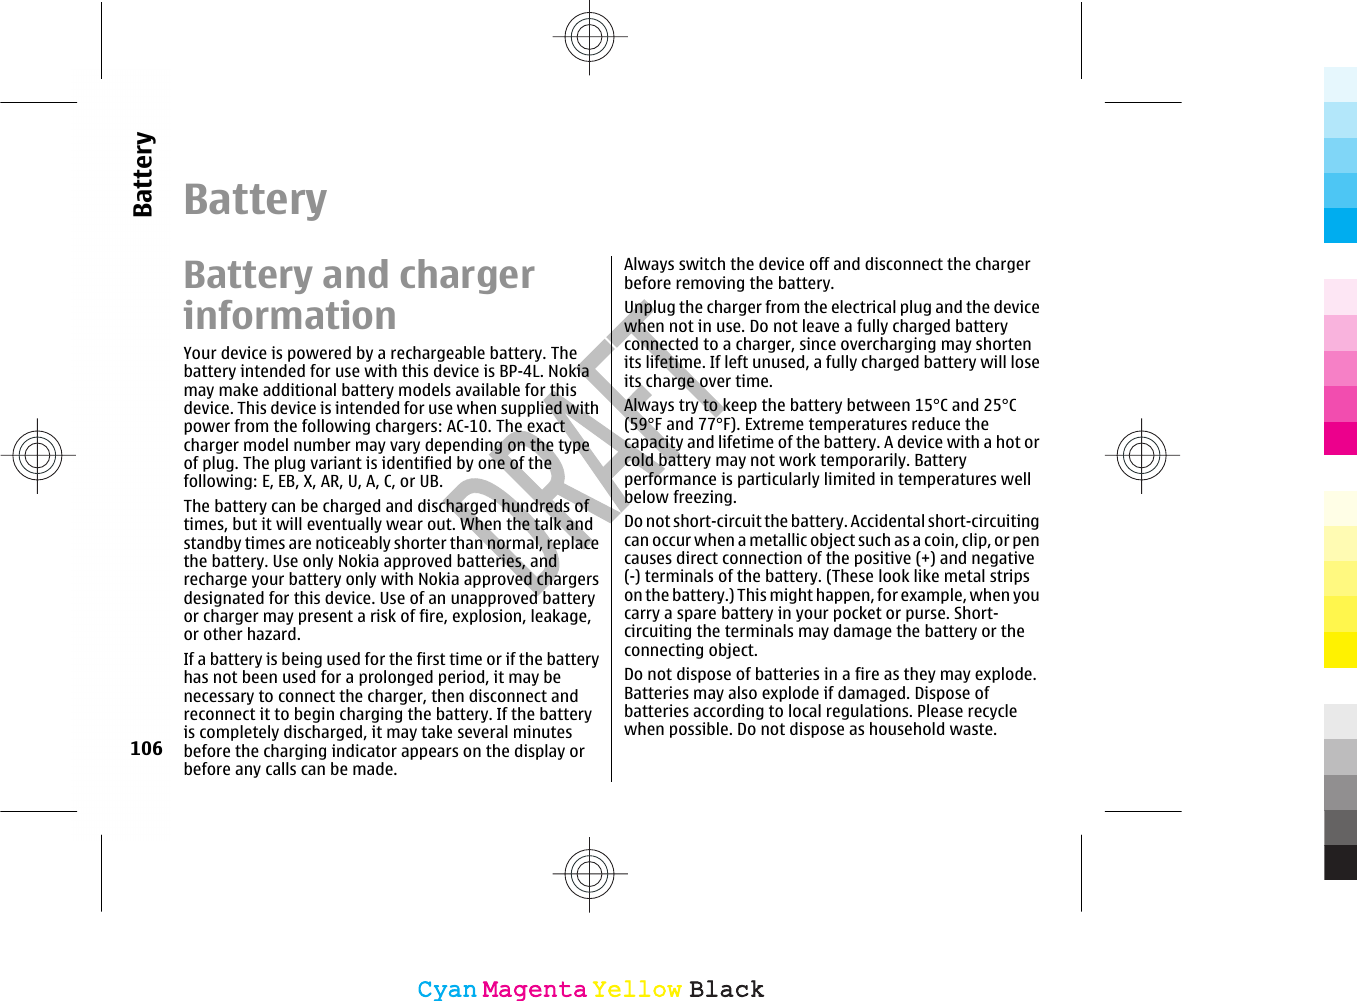 BatteryBattery and chargerinformationYour device is powered by a rechargeable battery. Thebattery intended for use with this device is BP-4L. Nokiamay make additional battery models available for thisdevice. This device is intended for use when supplied withpower from the following chargers: AC-10. The exactcharger model number may vary depending on the typeof plug. The plug variant is identified by one of thefollowing: E, EB, X, AR, U, A, C, or UB.The battery can be charged and discharged hundreds oftimes, but it will eventually wear out. When the talk andstandby times are noticeably shorter than normal, replacethe battery. Use only Nokia approved batteries, andrecharge your battery only with Nokia approved chargersdesignated for this device. Use of an unapproved batteryor charger may present a risk of fire, explosion, leakage,or other hazard.If a battery is being used for the first time or if the batteryhas not been used for a prolonged period, it may benecessary to connect the charger, then disconnect andreconnect it to begin charging the battery. If the batteryis completely discharged, it may take several minutesbefore the charging indicator appears on the display orbefore any calls can be made.Always switch the device off and disconnect the chargerbefore removing the battery.Unplug the charger from the electrical plug and the devicewhen not in use. Do not leave a fully charged batteryconnected to a charger, since overcharging may shortenits lifetime. If left unused, a fully charged battery will loseits charge over time.Always try to keep the battery between 15°C and 25°C(59°F and 77°F). Extreme temperatures reduce thecapacity and lifetime of the battery. A device with a hot orcold battery may not work temporarily. Batteryperformance is particularly limited in temperatures wellbelow freezing.Do not short-circuit the battery. Accidental short-circuitingcan occur when a metallic object such as a coin, clip, or pencauses direct connection of the positive (+) and negative(-) terminals of the battery. (These look like metal stripson the battery.) This might happen, for example, when youcarry a spare battery in your pocket or purse. Short-circuiting the terminals may damage the battery or theconnecting object.Do not dispose of batteries in a fire as they may explode.Batteries may also explode if damaged. Dispose ofbatteries according to local regulations. Please recyclewhen possible. Do not dispose as household waste.106BatteryCyanCyanMagentaMagentaYellowYellowBlackBlack